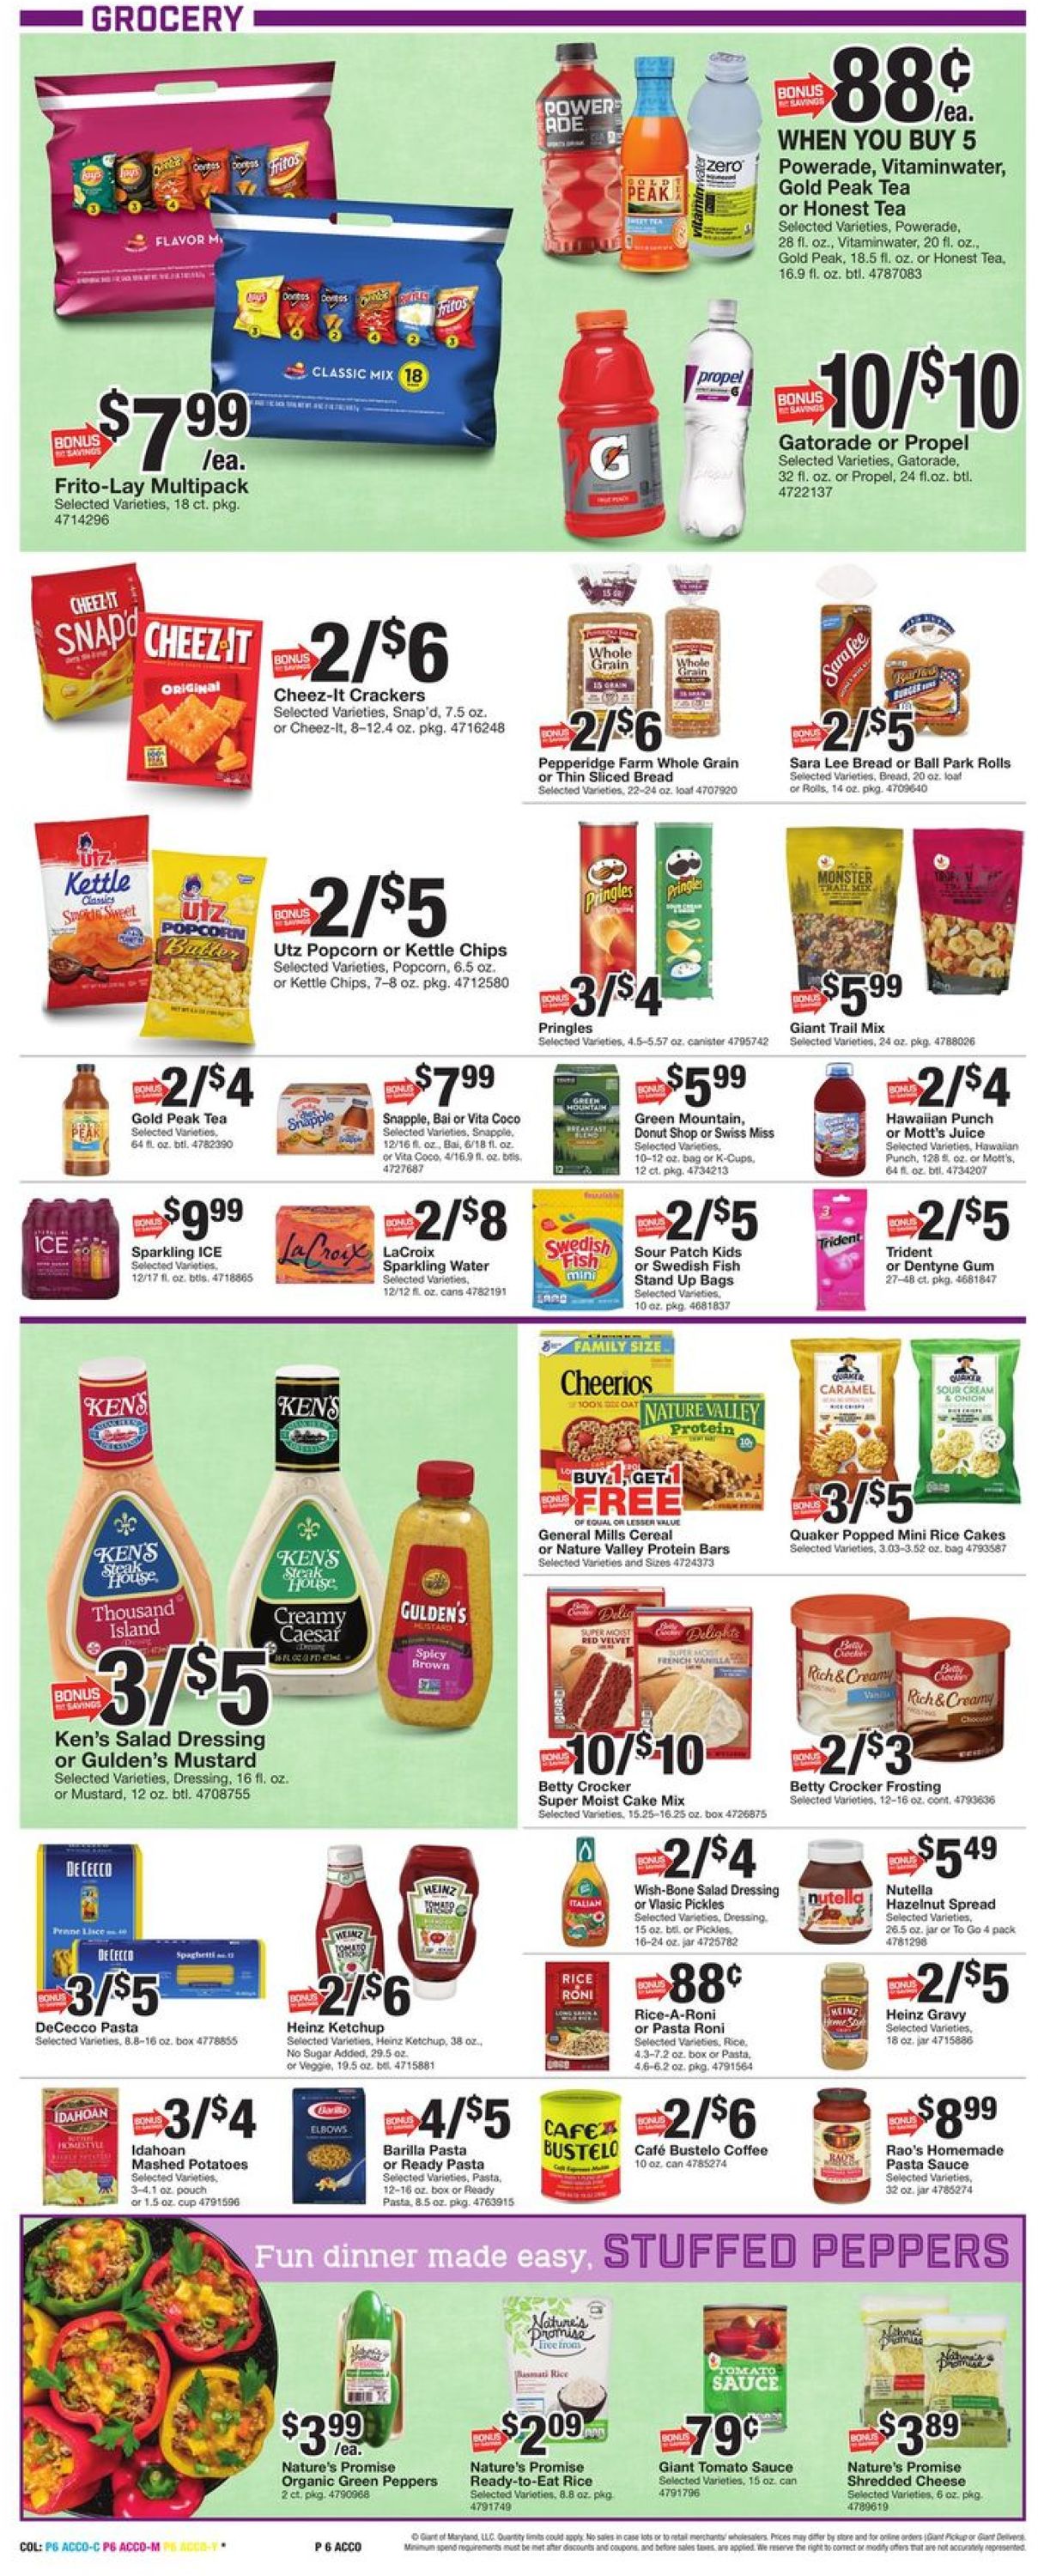 Giant Food - Easter 2021 Ad Weekly Ad Circular - valid 03/26-04/01/2021 (Page 8)